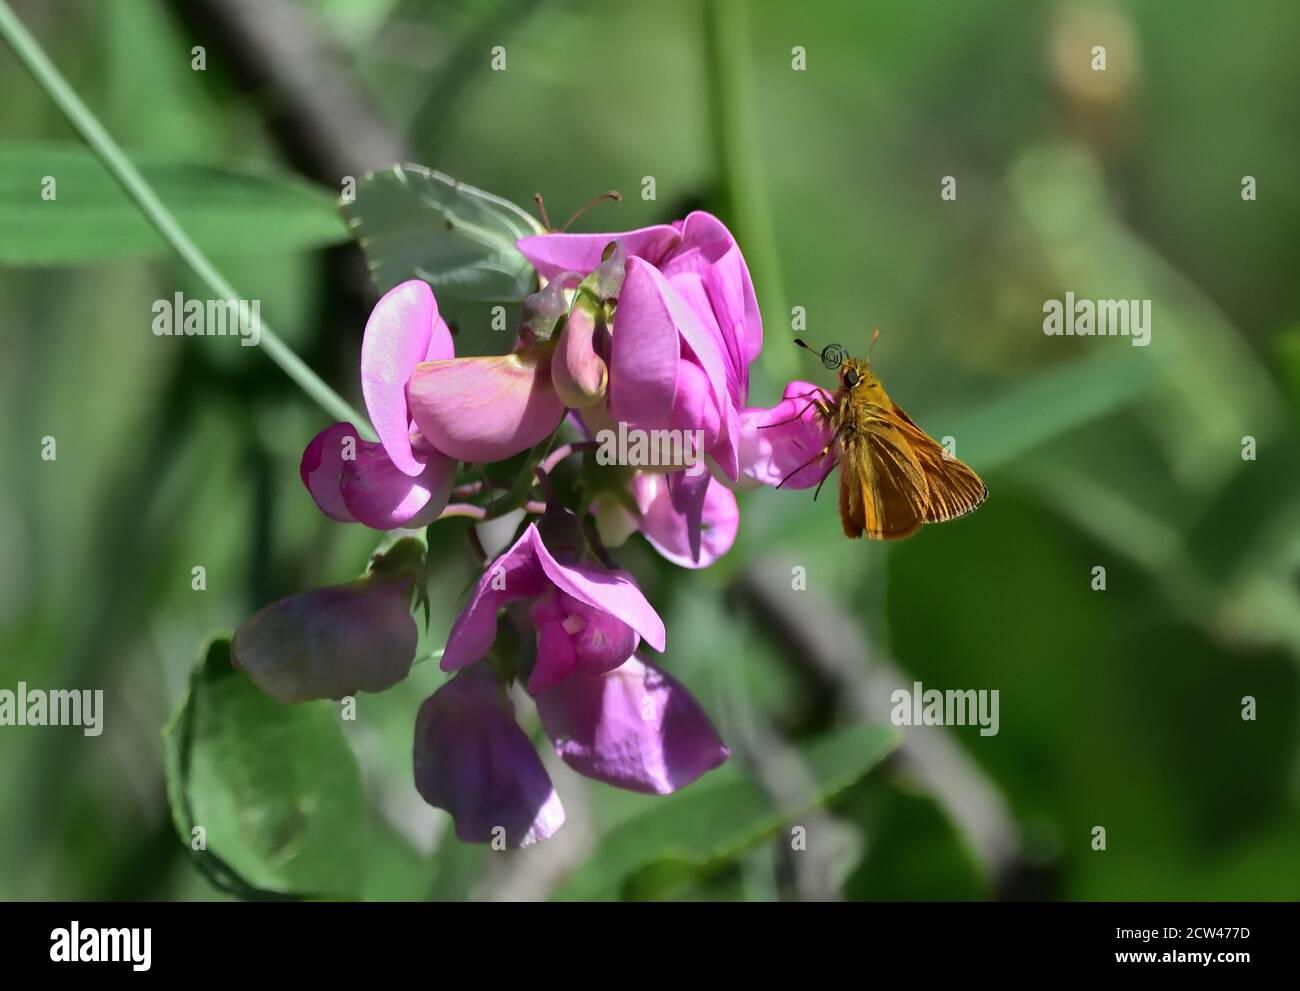 Butterfly of the species Silver-spotted skipper (Hesperia comma) or commonly called Chives, on Lathyrus japonicus and natural bokeh background. Stock Photo